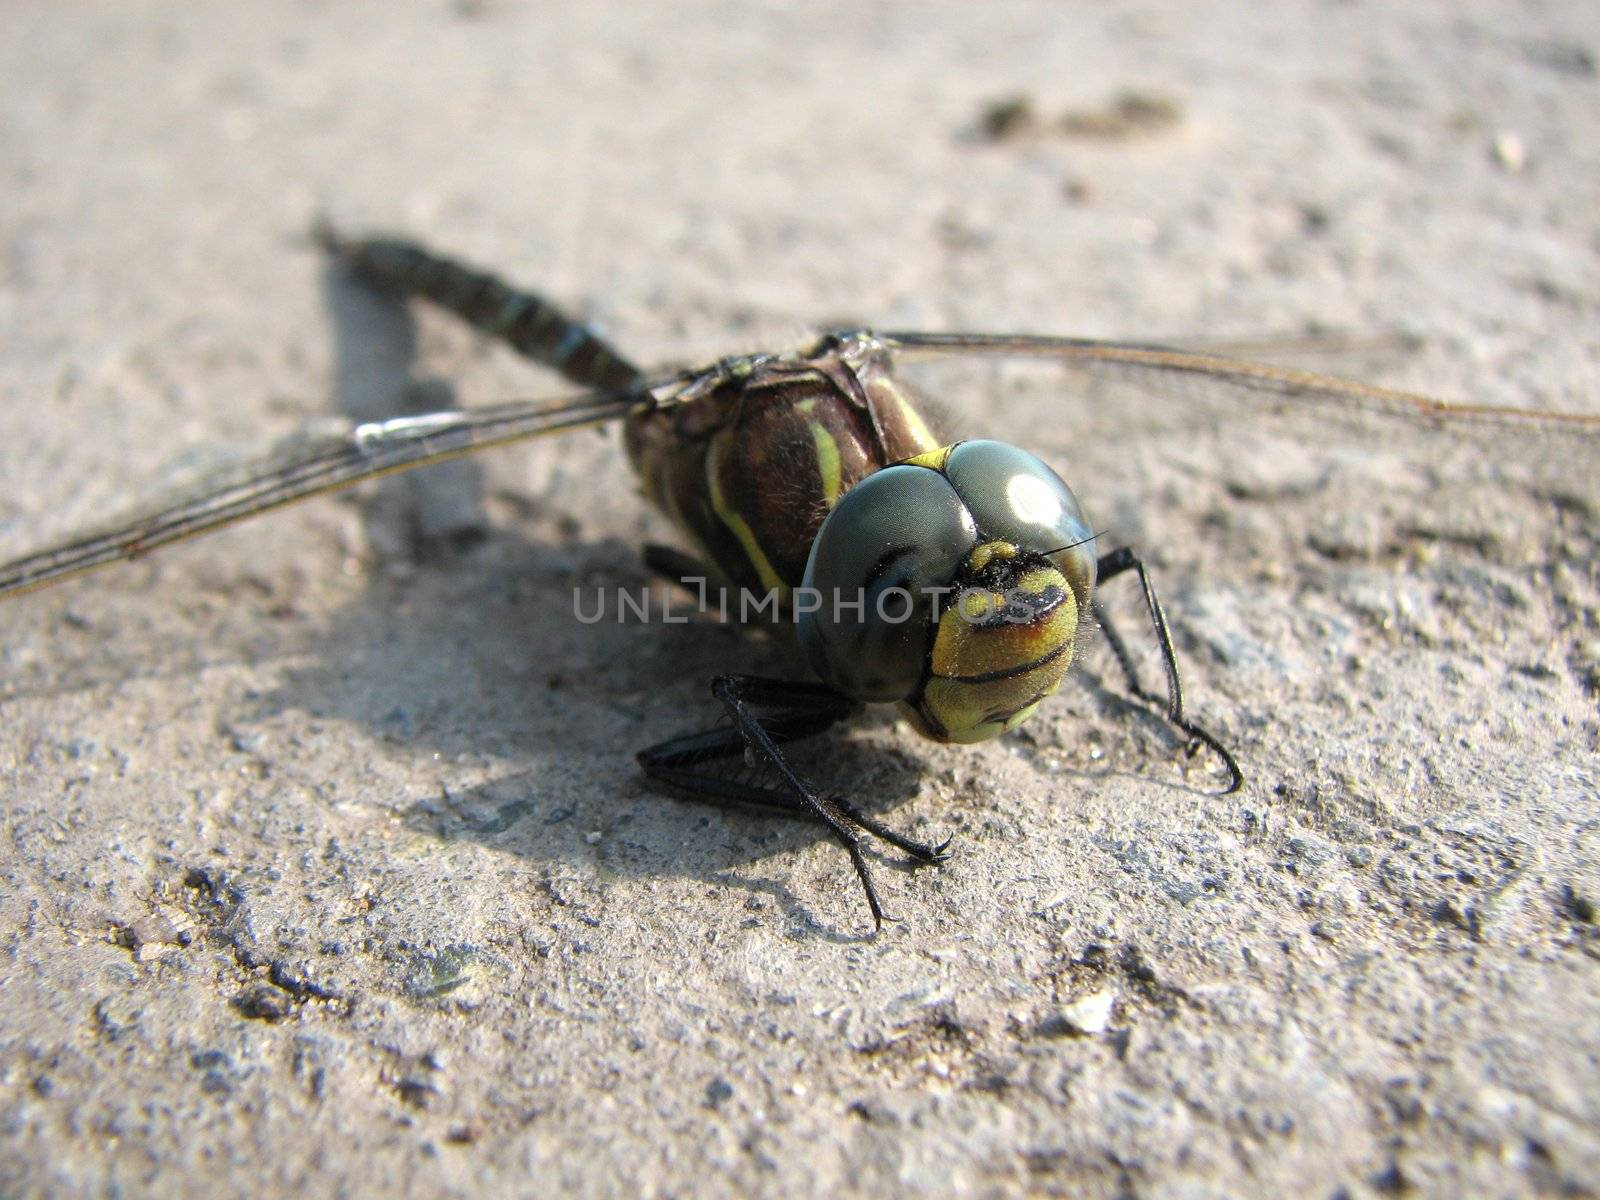 The dragonfly sits on road and has a rest